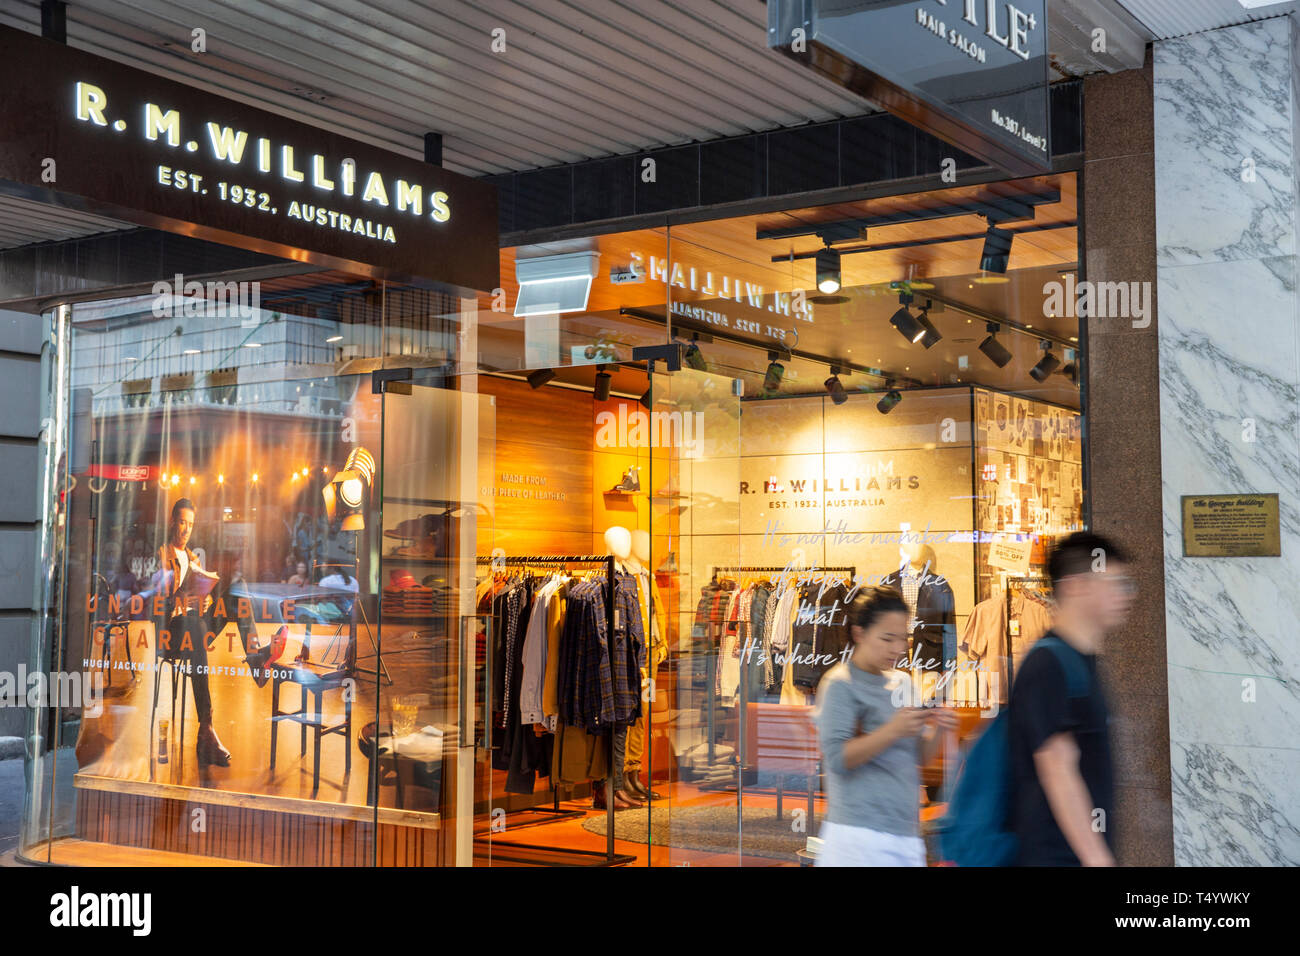 rm williams store locations